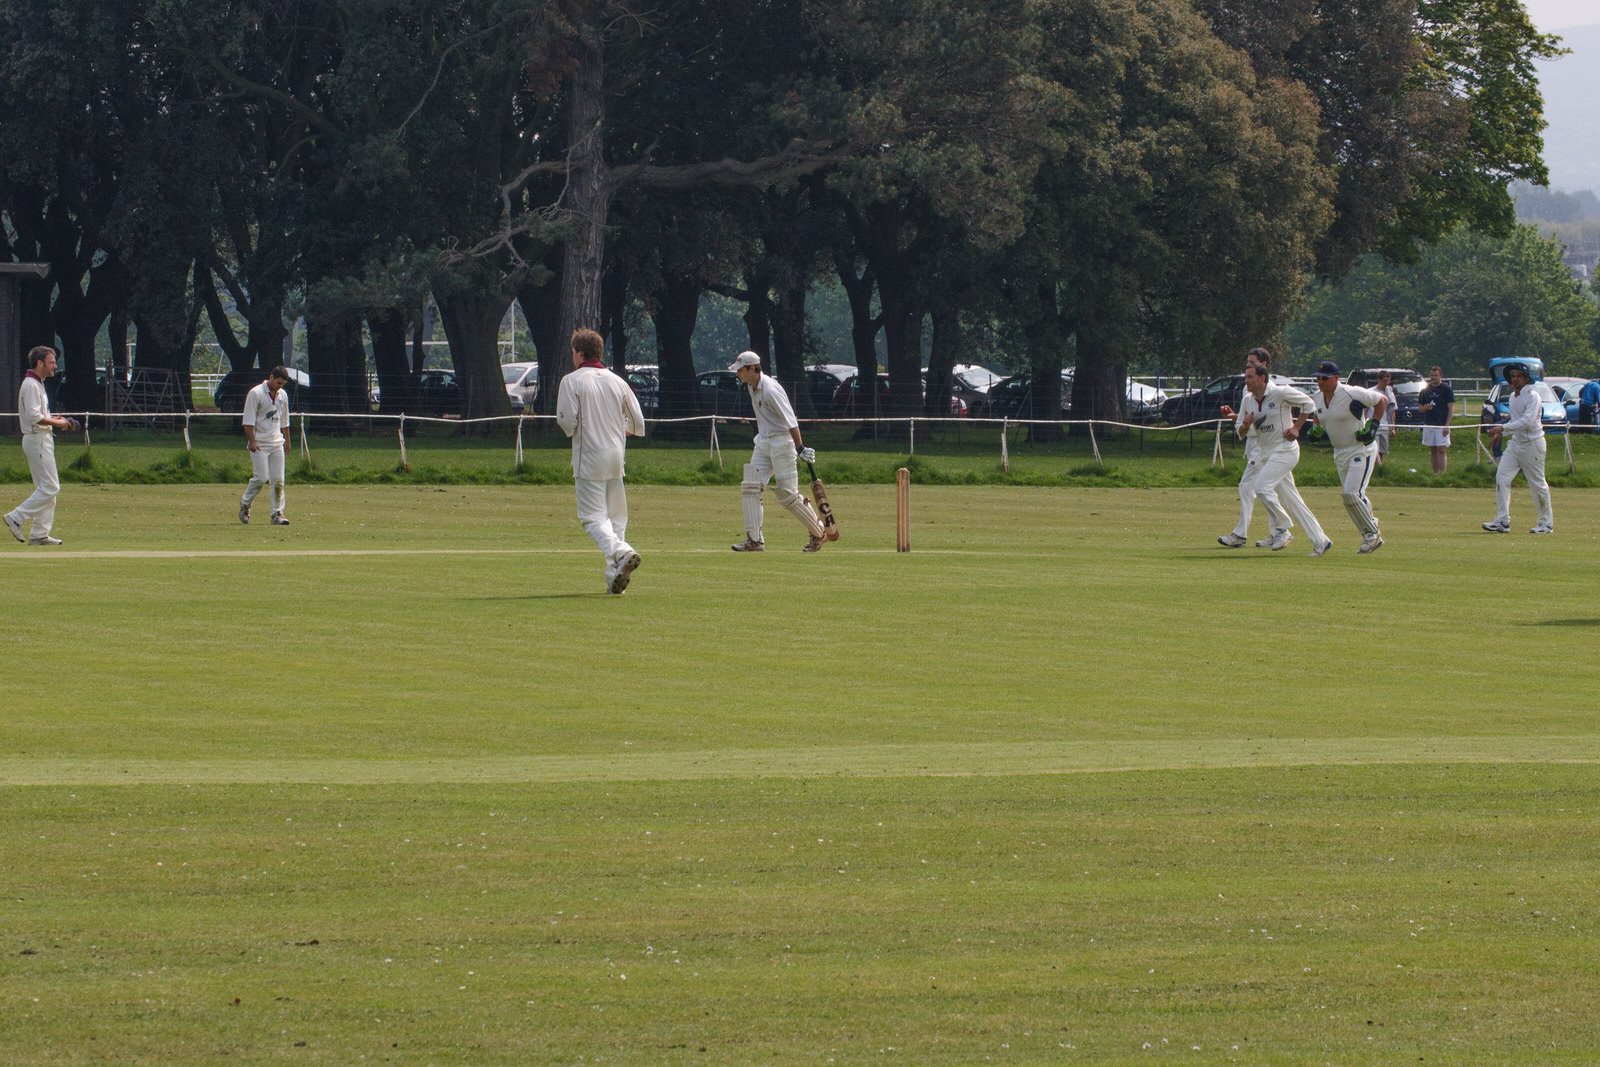 TWO CRICKET CLUBS IN PHOENIX PARK NEAR THE WELLINGTON MONUMENT 032